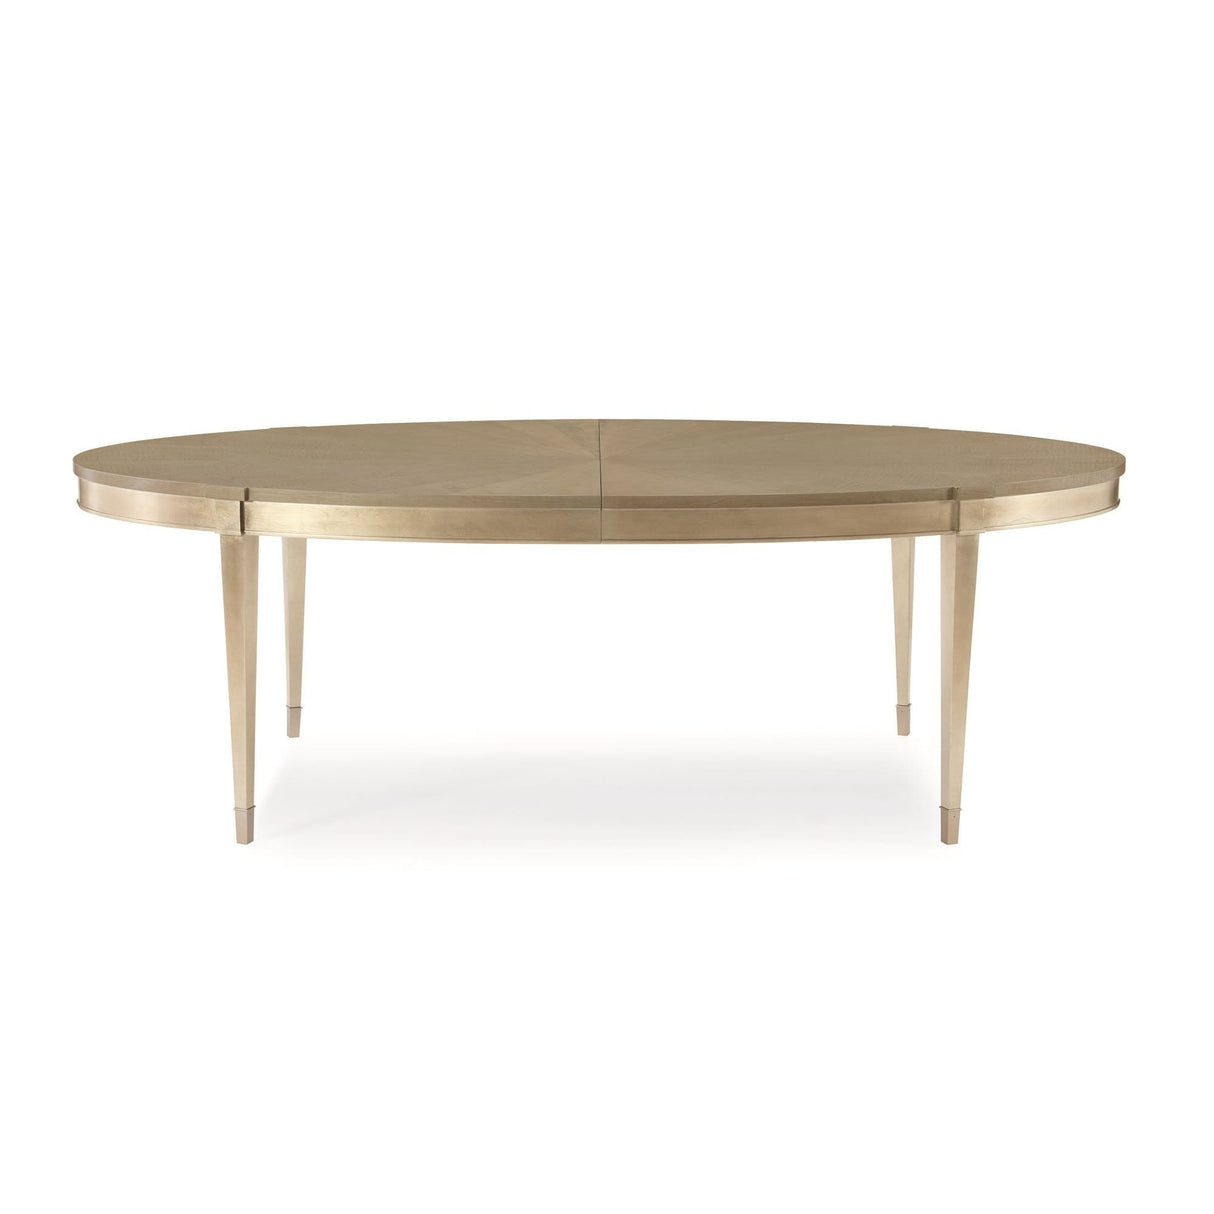 Caracole A House Favorite Dining Table Furniture caracole-CLA-417-205 662896011234